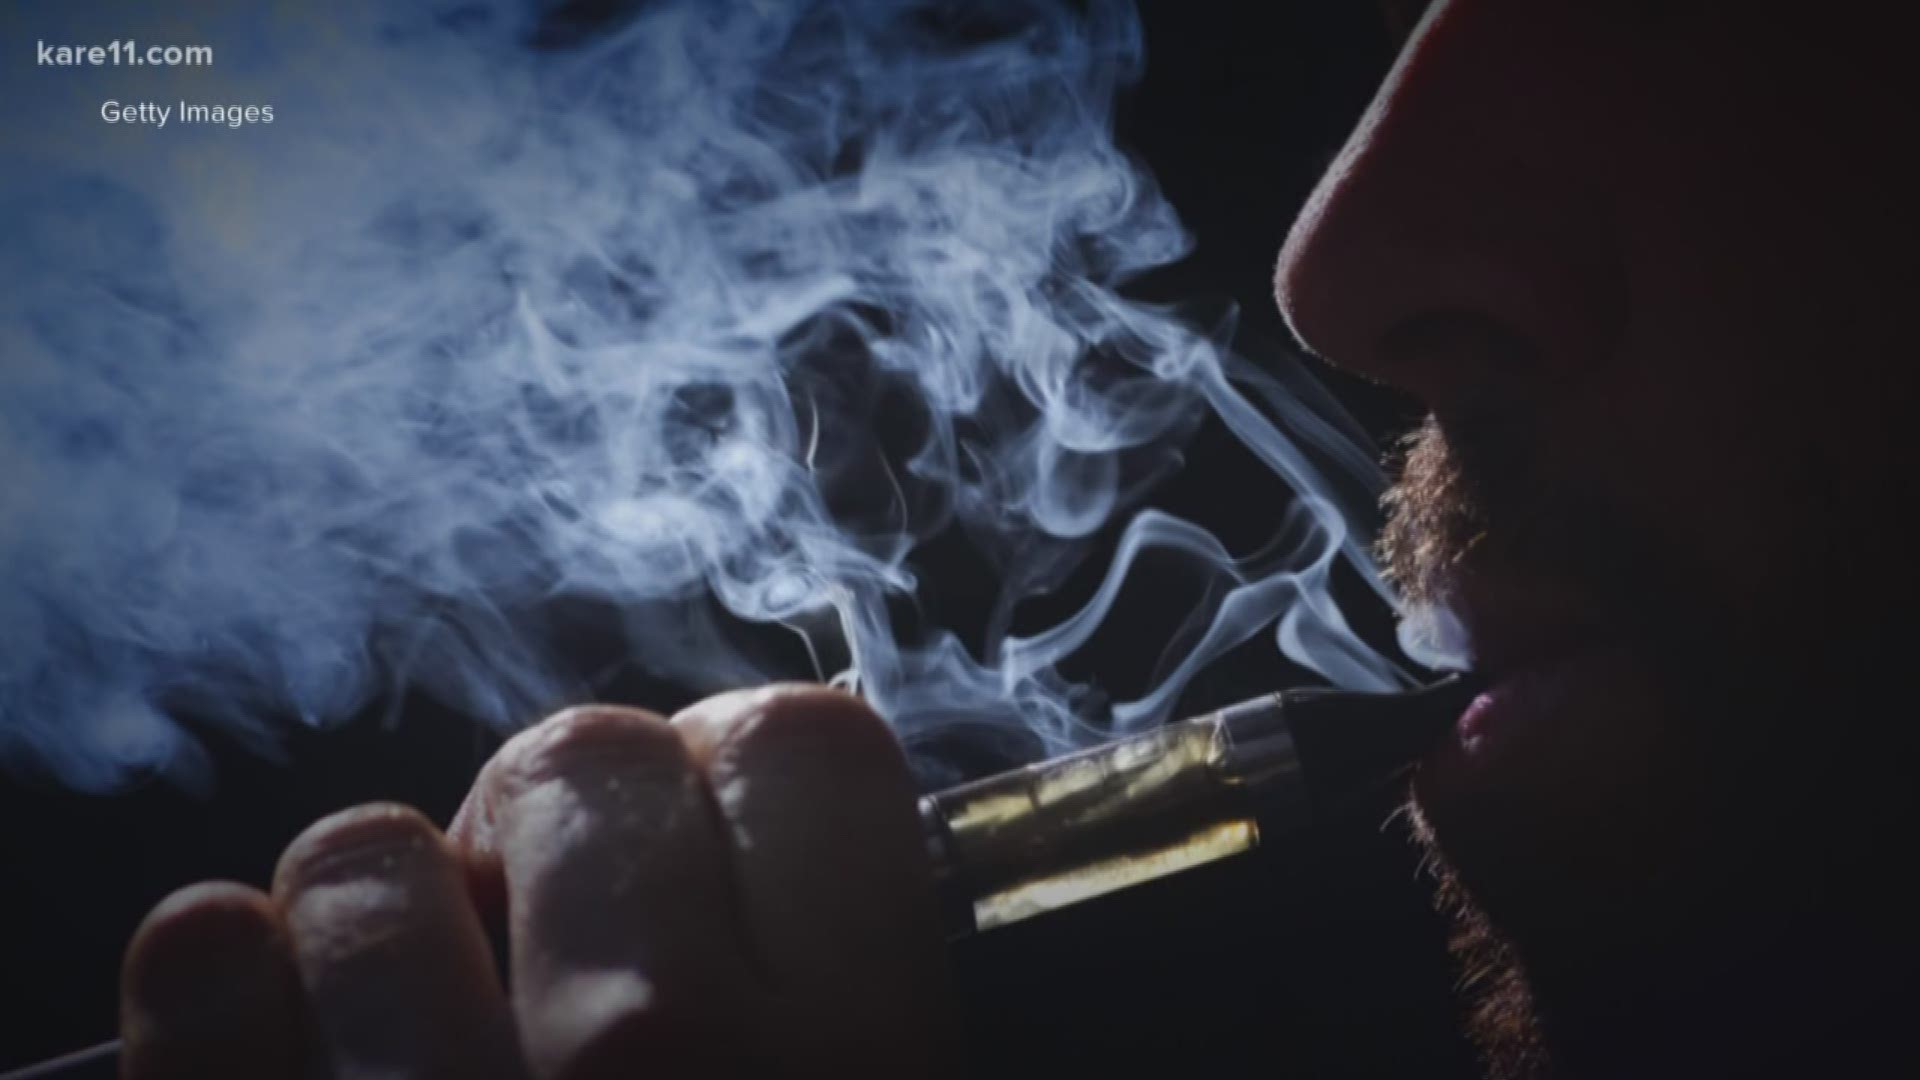 We're following up on the vaping story we broke last night at 10 p.m. We told you how the state would issue an alert today after four teens were hospitalized with severe lung damage from vaping.